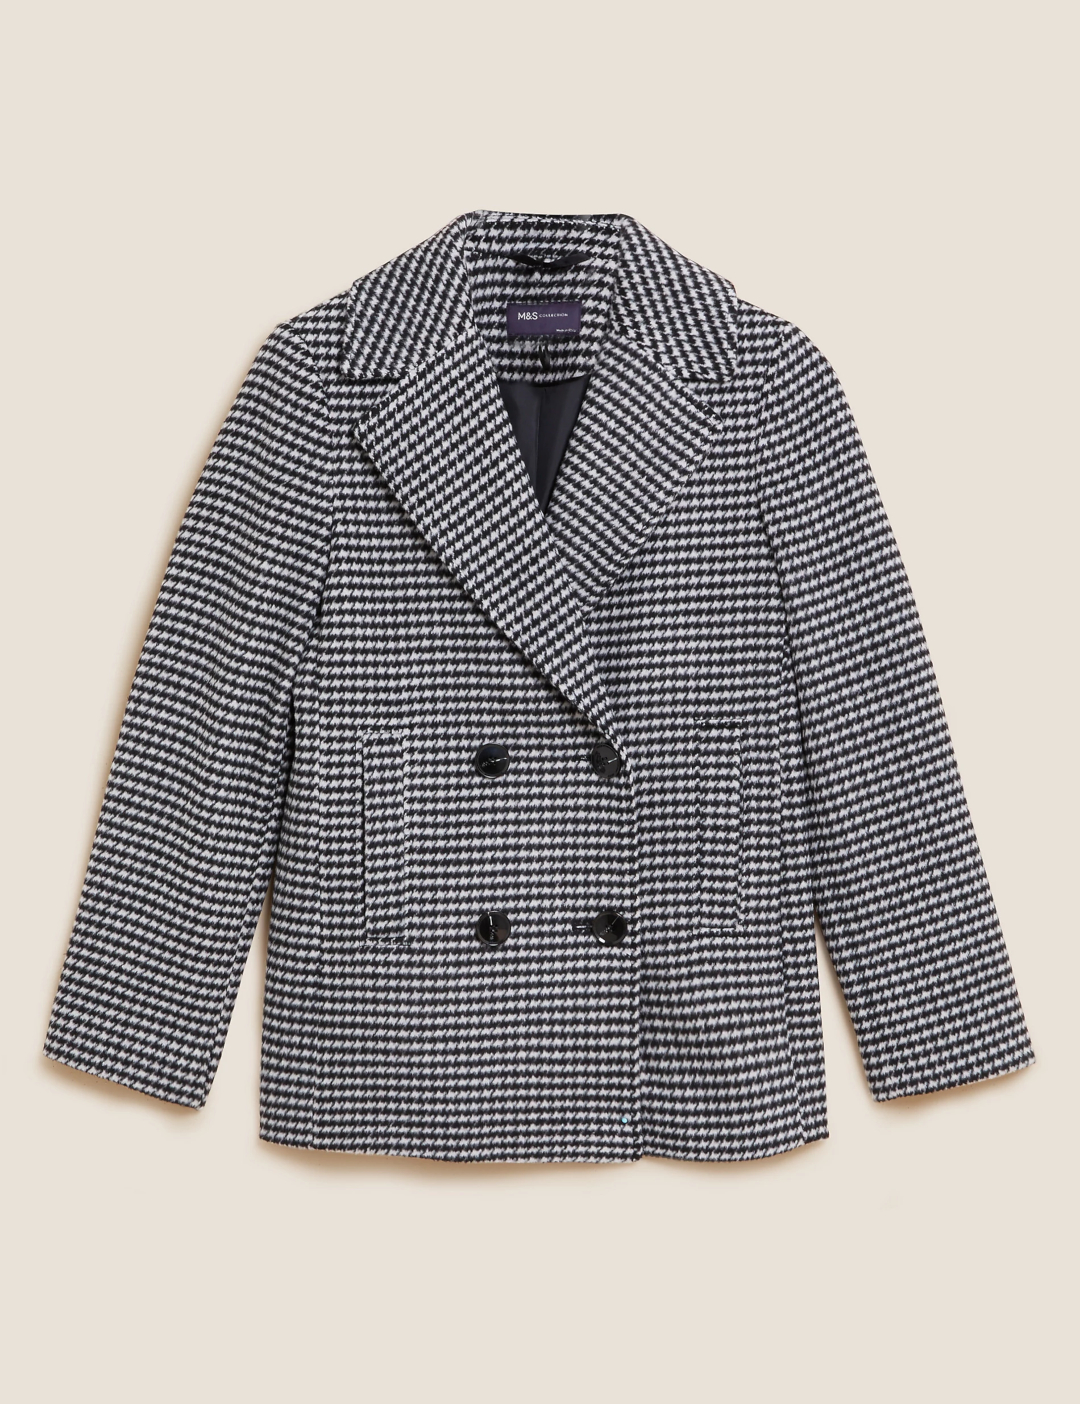 Dogtooth Collared Short Coat with Wool by Marks & Spencer - Black Mix